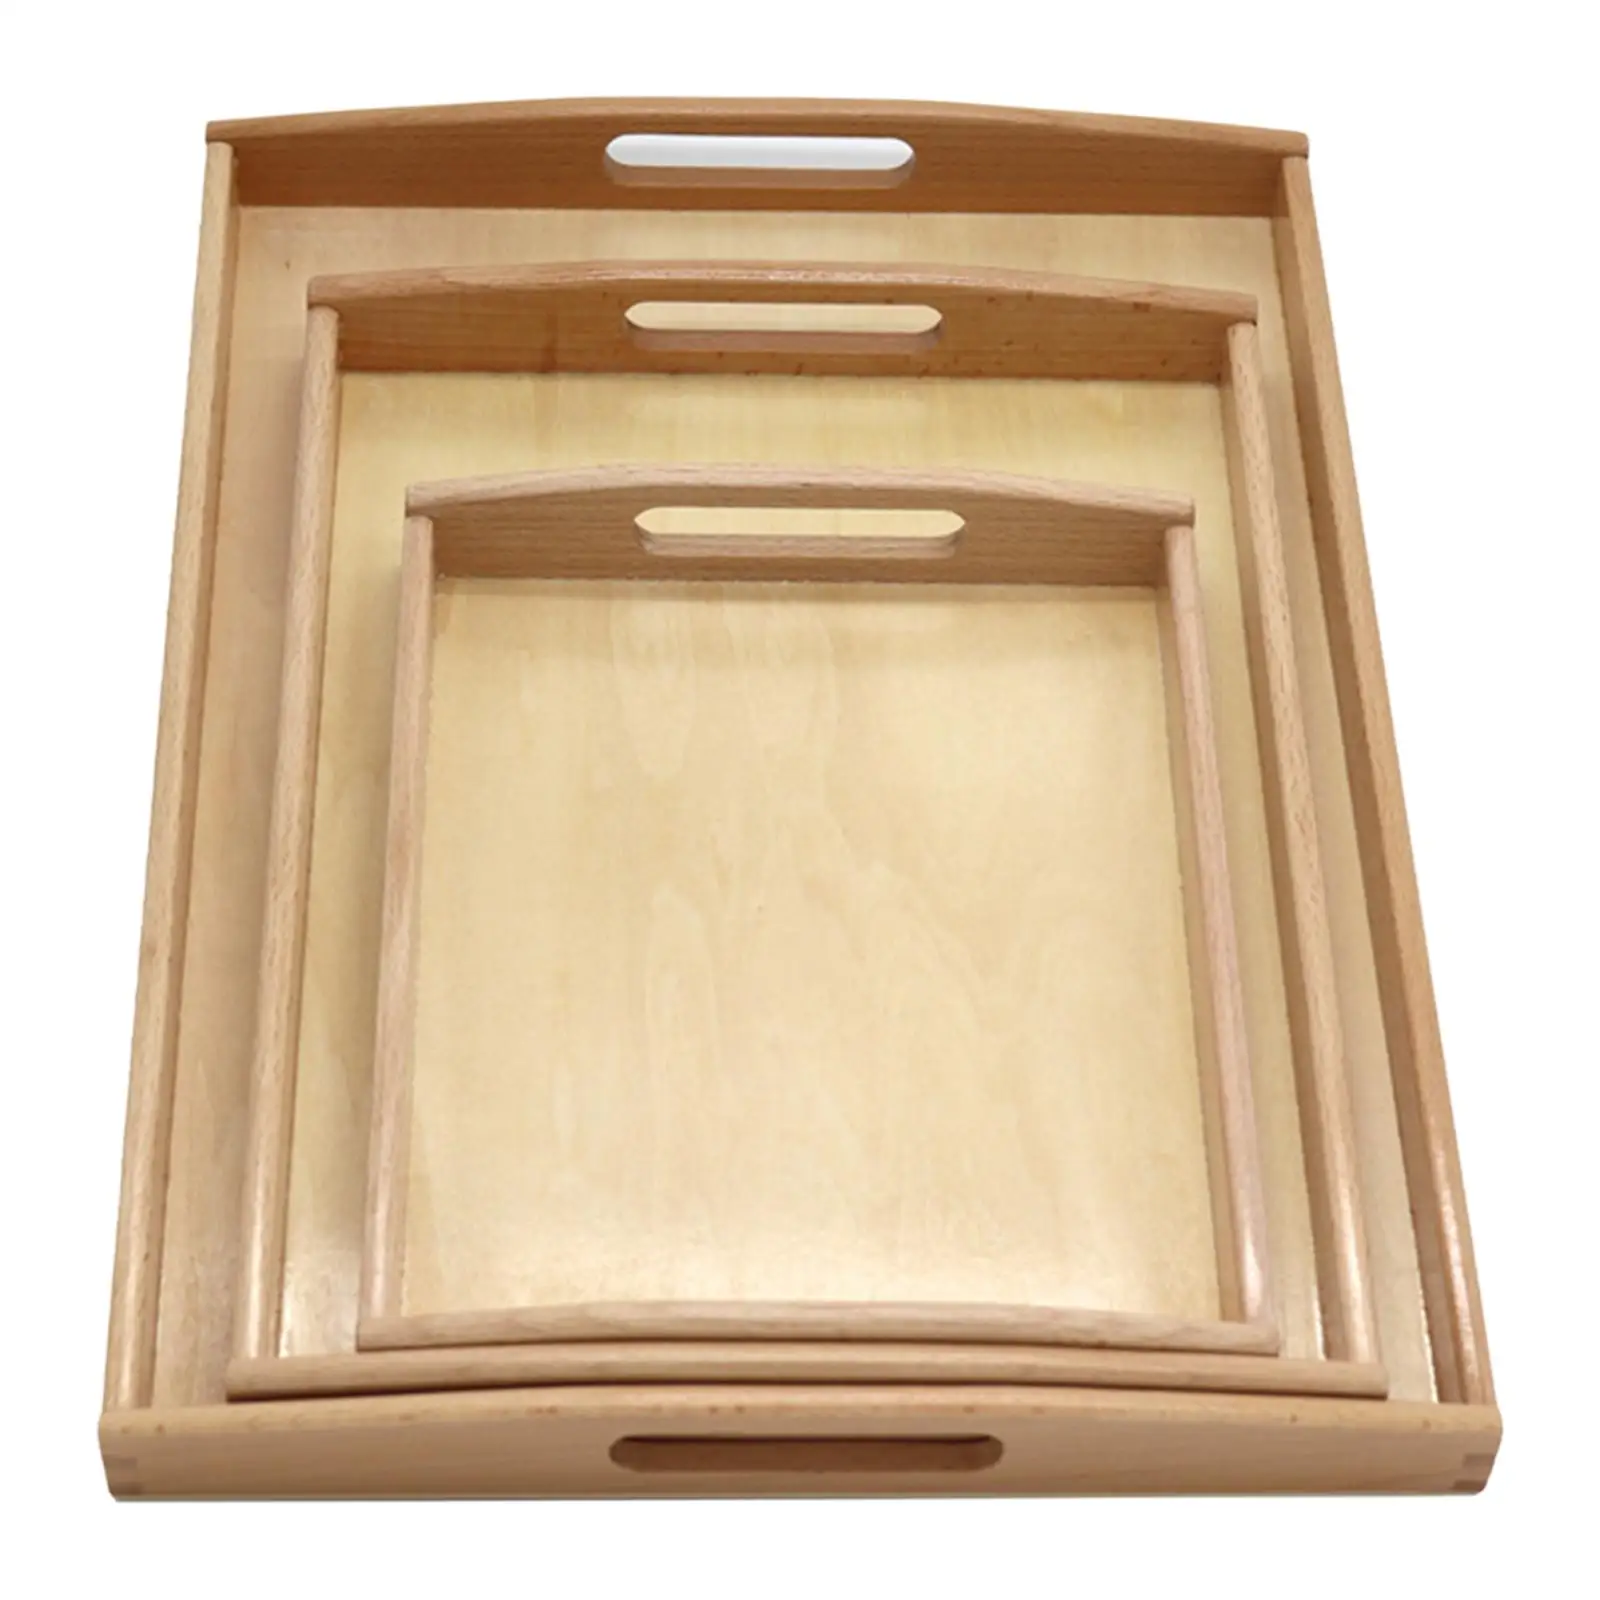 Wood Serving Tray Montessori Sand Tray Toy Educational Durable Light Wood Trays